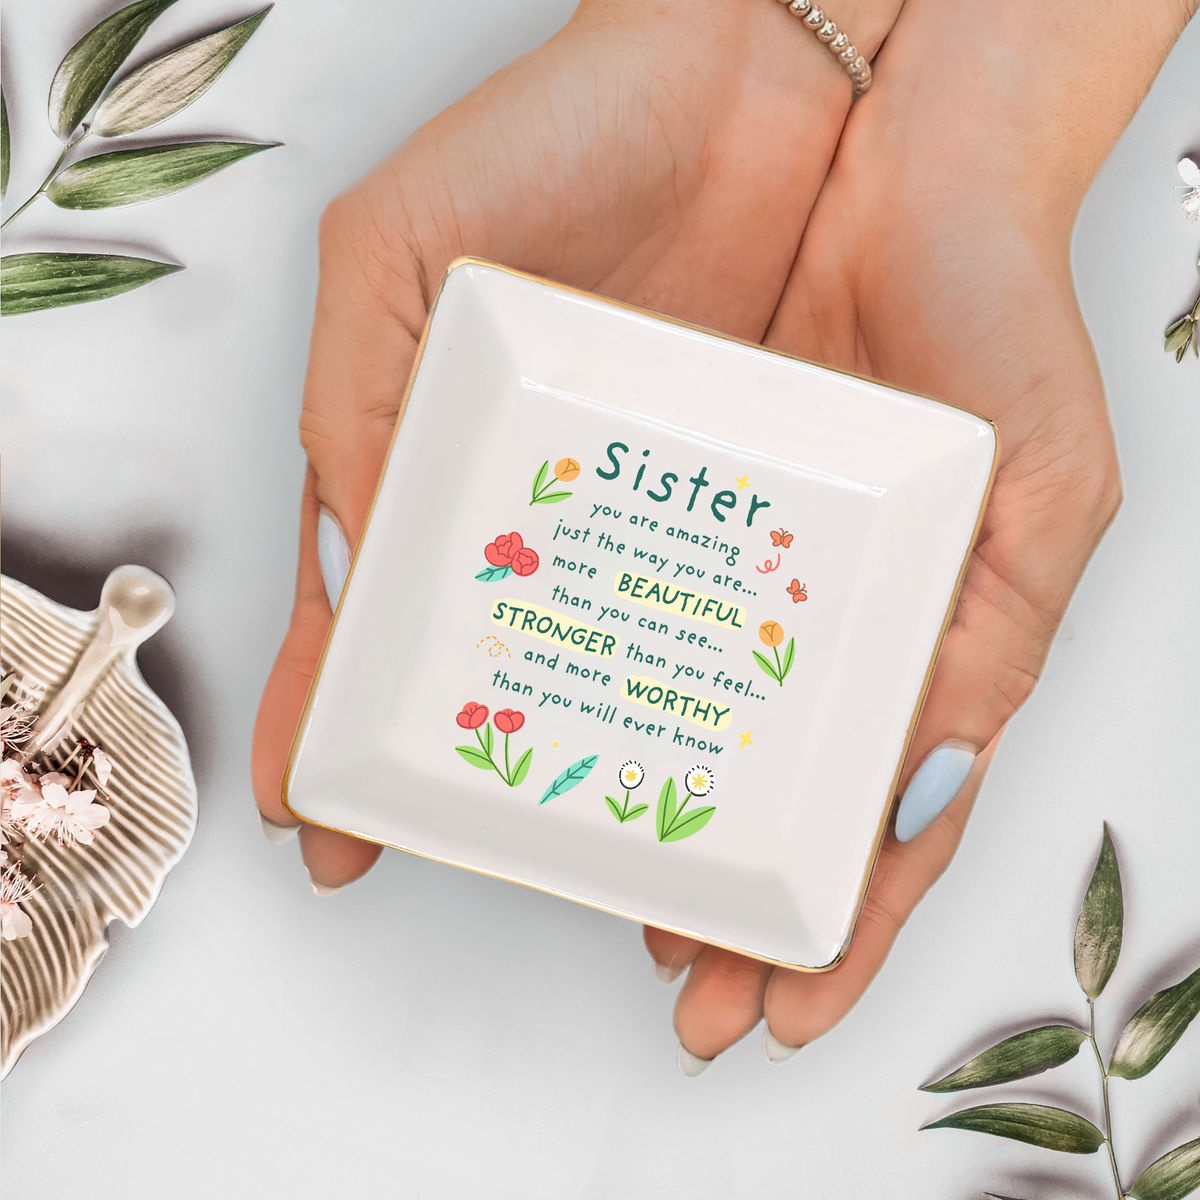 Personalized Jewelry Tray - Jewelry Tray - SISTER You are Amazing Just the way you are... More Beautiful than you can see... Stronger than you feel... & more worthy than you will ever know - Bridesmaid Gifts, Birthday Gift for Her, Graduation Gift, Bridal Shower Gift, Gift for Friends_3